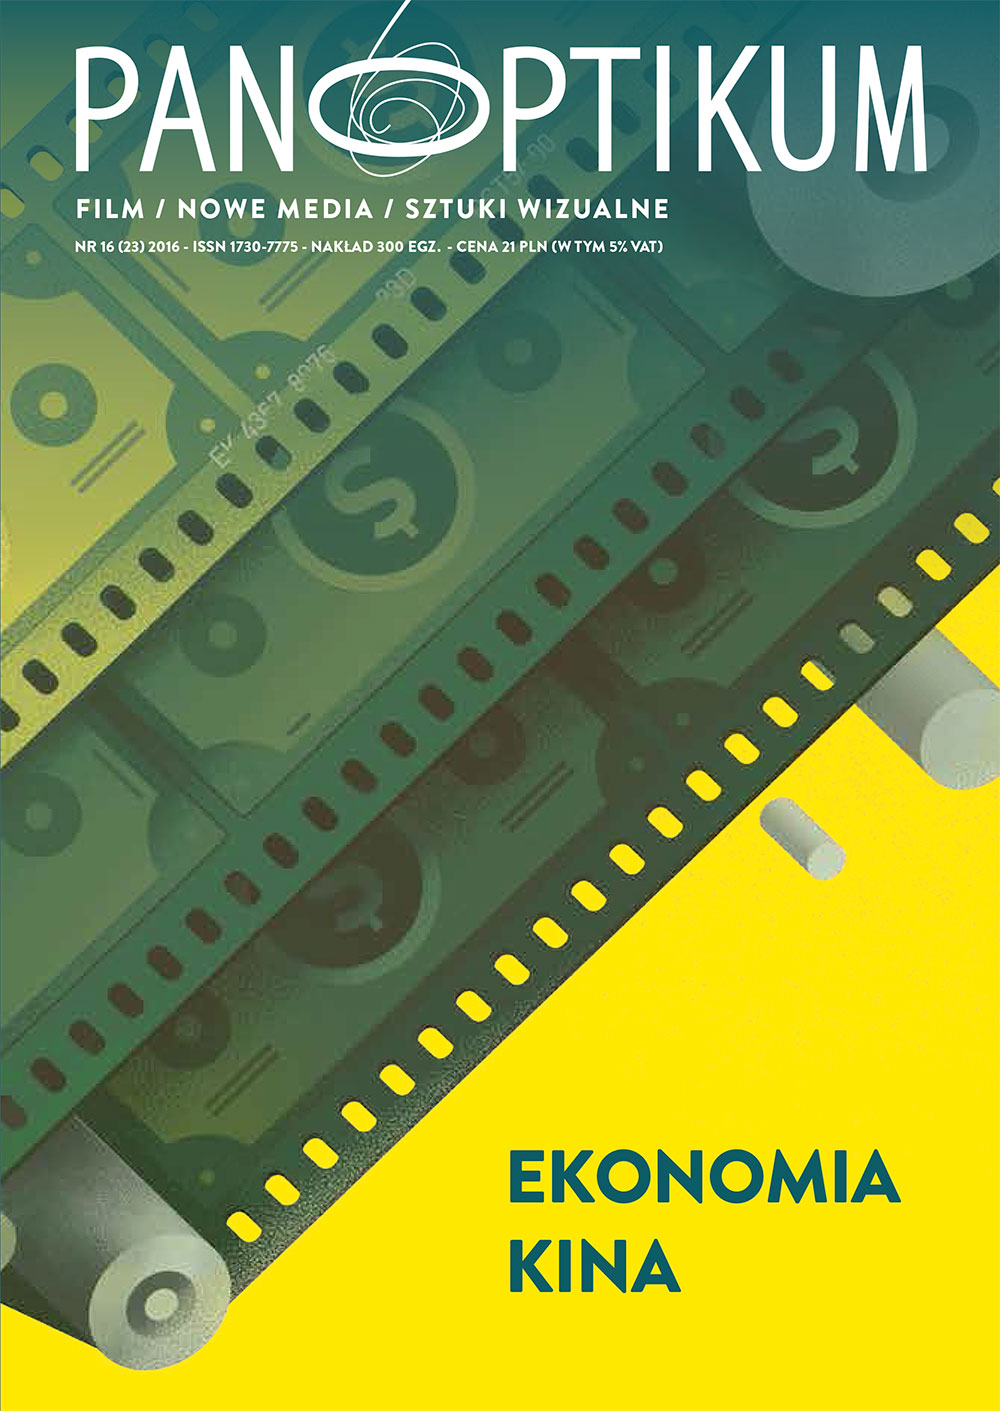 Evaluation of the Application for Operational Programme 
“Film Production” at the Polish Film Institute Cover Image